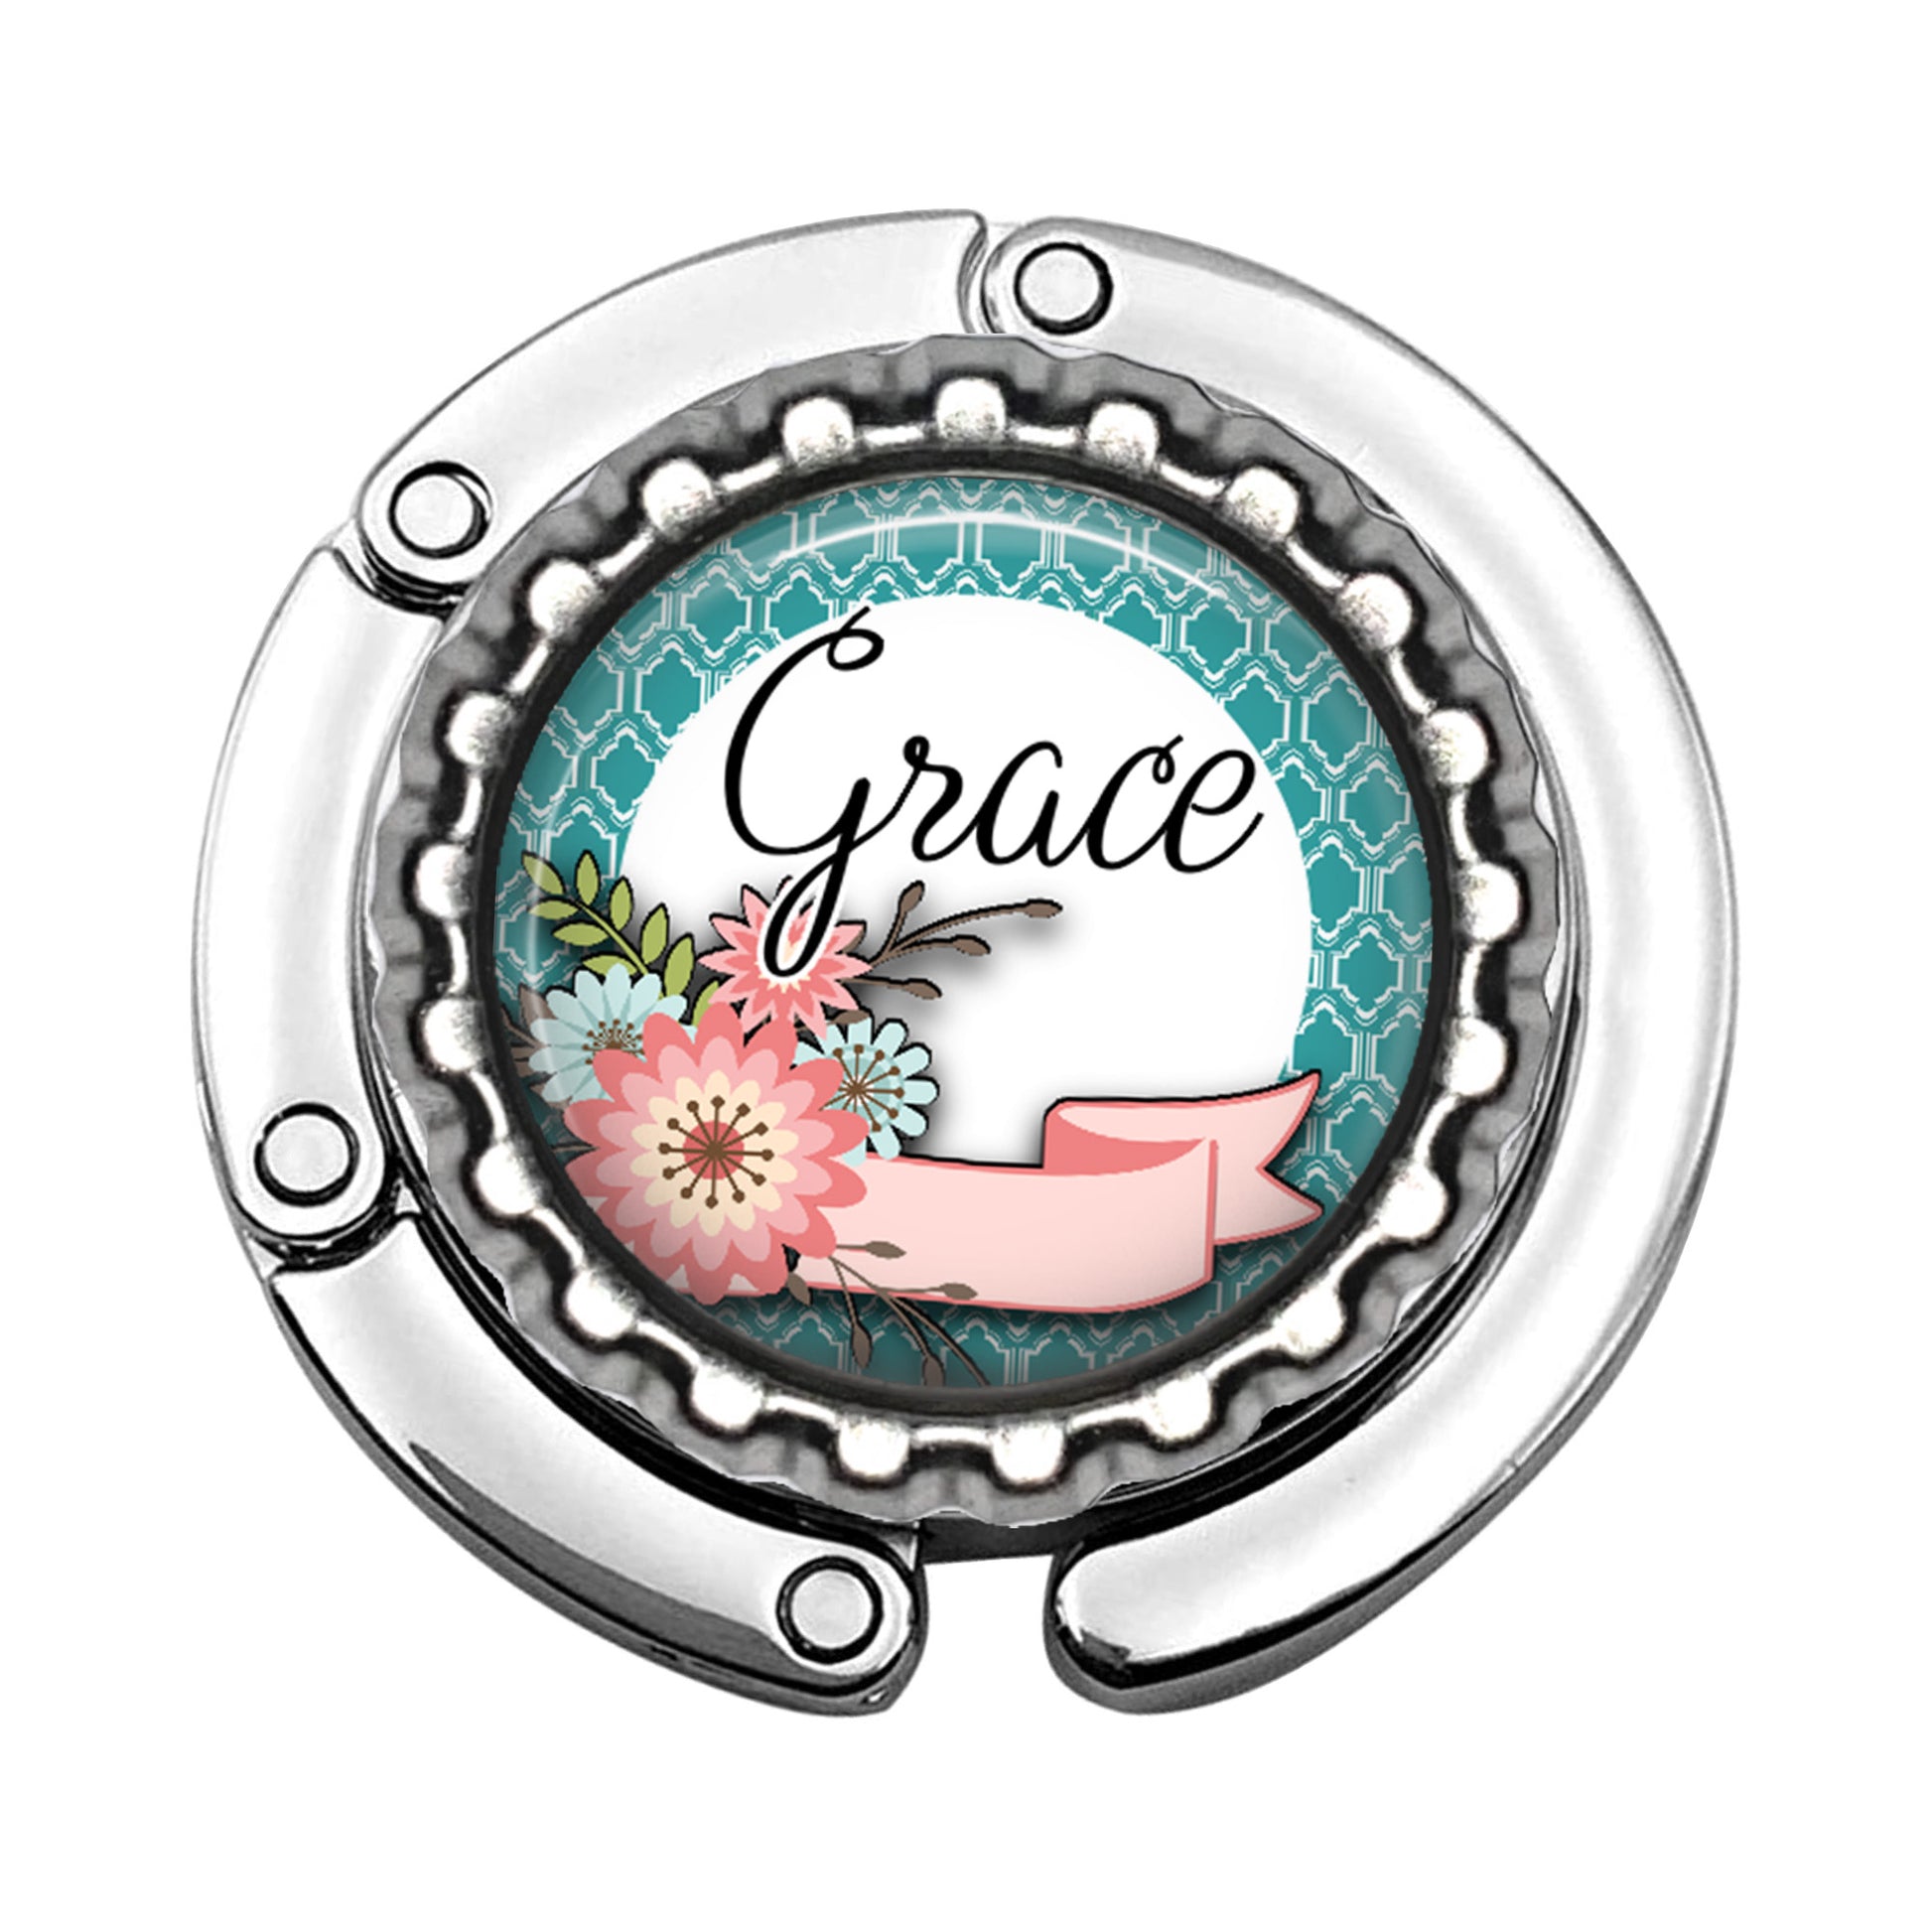 a picture of a clock with the word grace on it